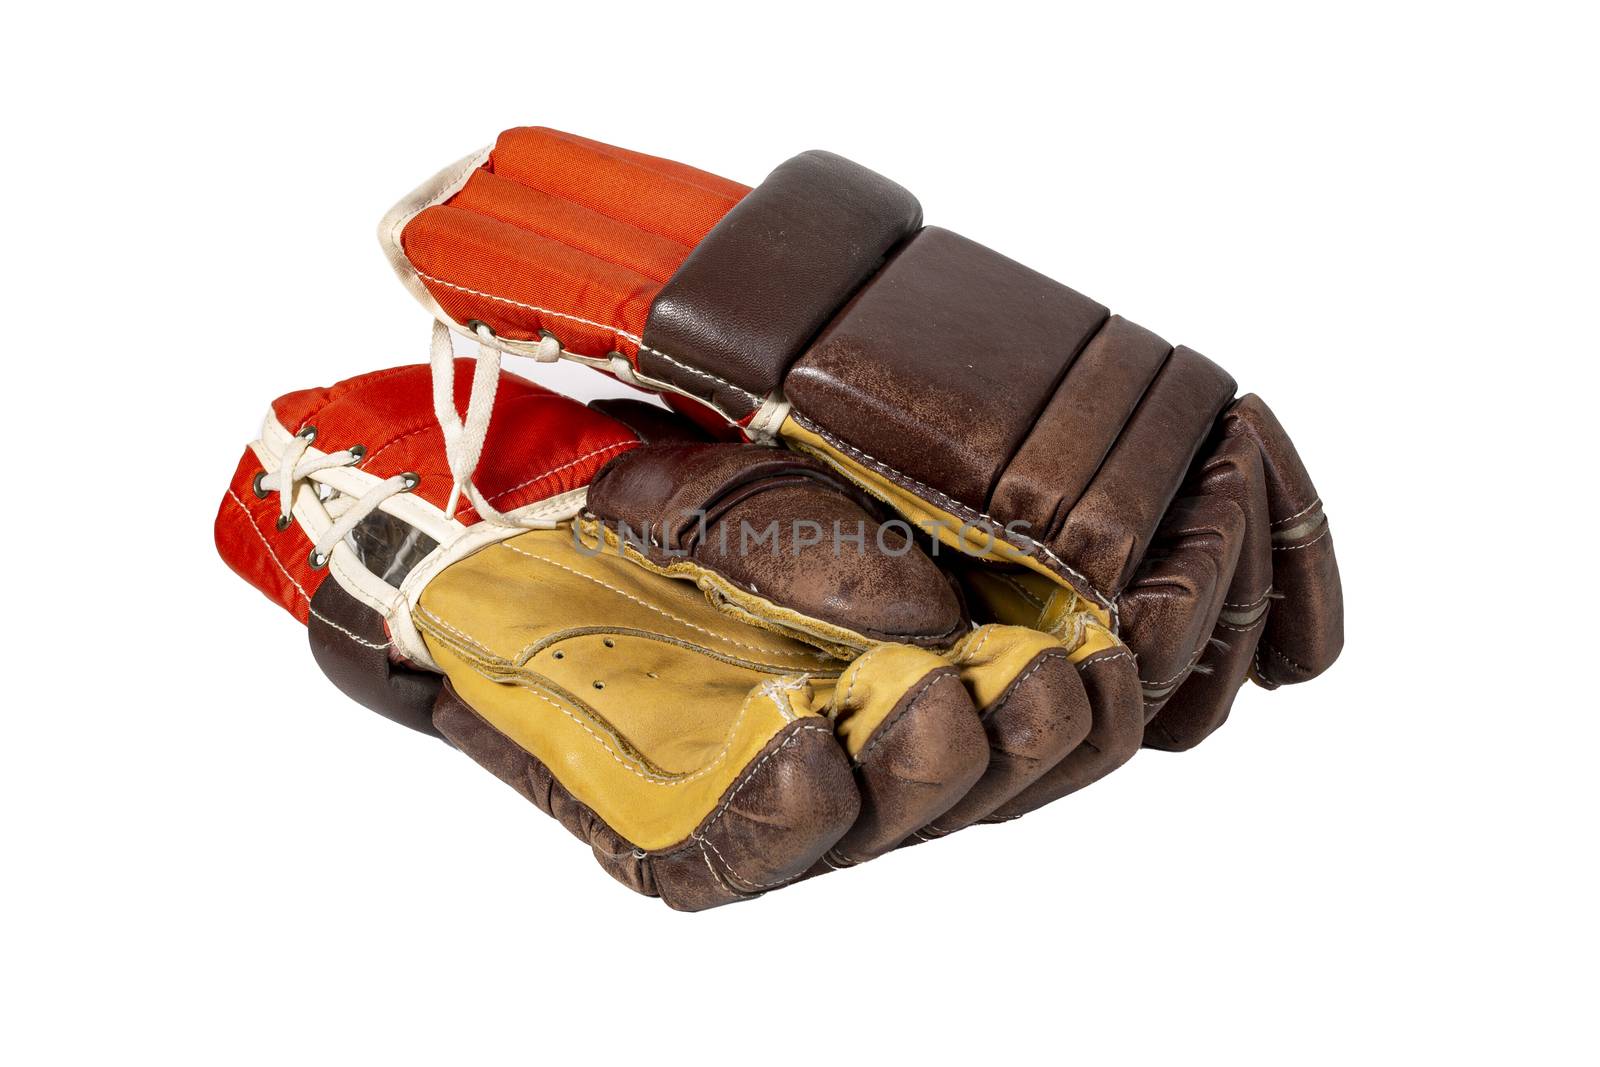 Old red hockey gloves for goalkeeper. Isolated over white background. The concept of the game of hockey and hockey sport.